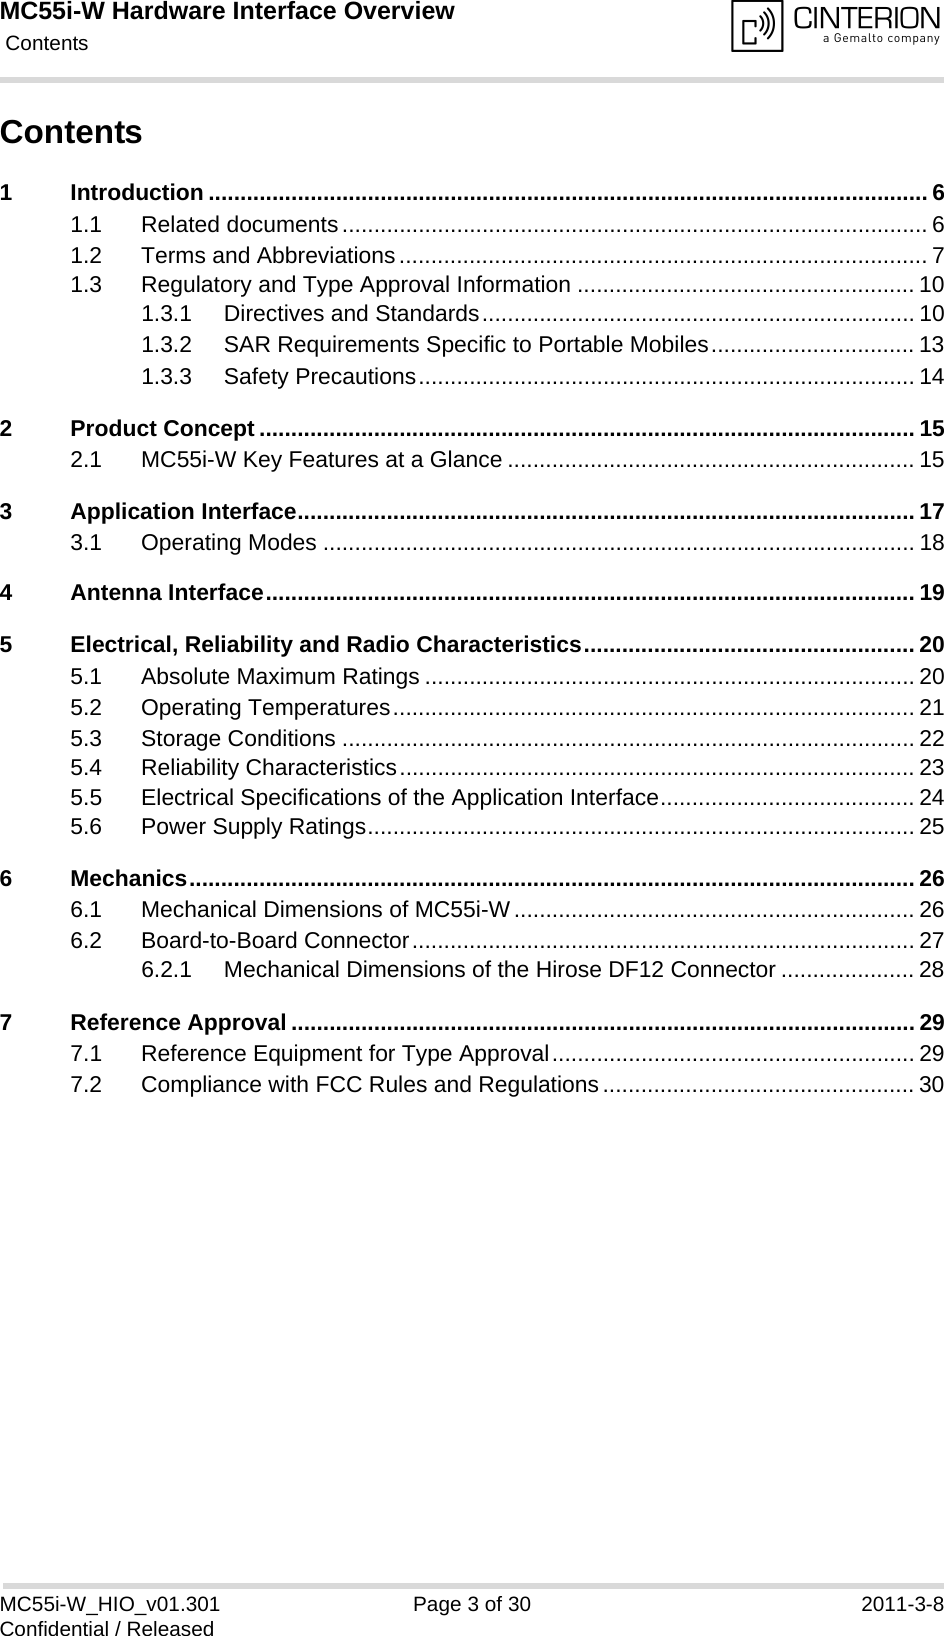 MC55i-W Hardware Interface Overview Contents30MC55i-W_HIO_v01.301 Page 3 of 30 2011-3-8Confidential / ReleasedContents1 Introduction ................................................................................................................. 61.1 Related documents............................................................................................ 61.2 Terms and Abbreviations................................................................................... 71.3 Regulatory and Type Approval Information ..................................................... 101.3.1 Directives and Standards.................................................................... 101.3.2 SAR Requirements Specific to Portable Mobiles................................ 131.3.3 Safety Precautions.............................................................................. 142 Product Concept ....................................................................................................... 152.1 MC55i-W Key Features at a Glance ................................................................ 153 Application Interface................................................................................................. 173.1 Operating Modes ............................................................................................. 184 Antenna Interface...................................................................................................... 195 Electrical, Reliability and Radio Characteristics.................................................... 205.1 Absolute Maximum Ratings ............................................................................. 205.2 Operating Temperatures.................................................................................. 215.3 Storage Conditions .......................................................................................... 225.4 Reliability Characteristics................................................................................. 235.5 Electrical Specifications of the Application Interface........................................ 245.6 Power Supply Ratings...................................................................................... 256 Mechanics.................................................................................................................. 266.1 Mechanical Dimensions of MC55i-W............................................................... 266.2 Board-to-Board Connector............................................................................... 276.2.1 Mechanical Dimensions of the Hirose DF12 Connector ..................... 287 Reference Approval .................................................................................................. 297.1 Reference Equipment for Type Approval......................................................... 297.2 Compliance with FCC Rules and Regulations................................................. 30